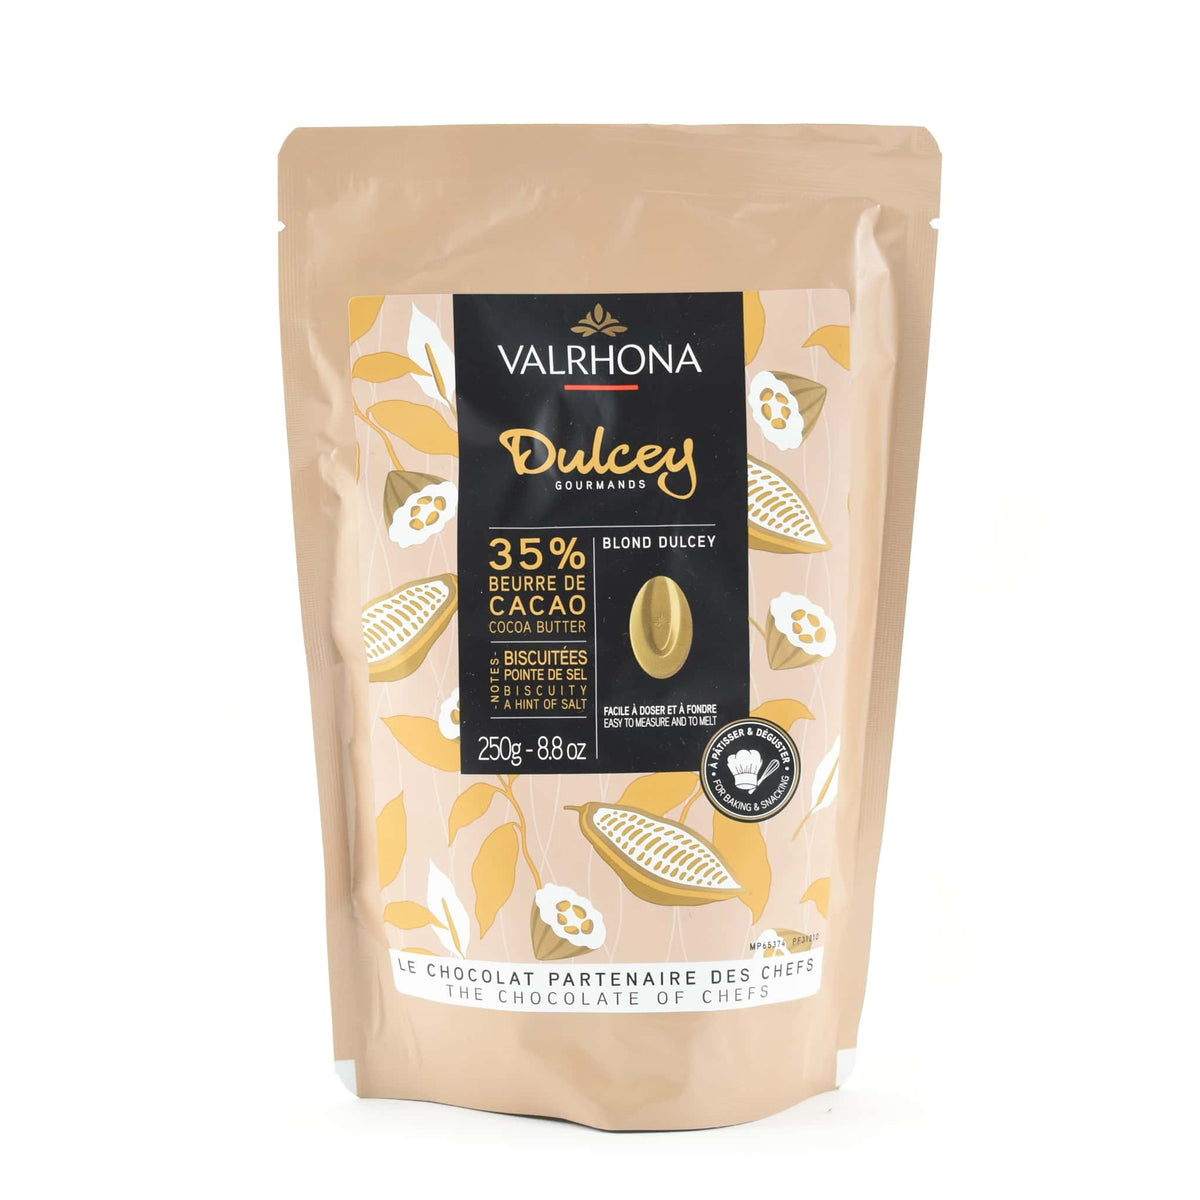 Valrhona 32% Dulcey Blonde Chocolate Feves, Food Related